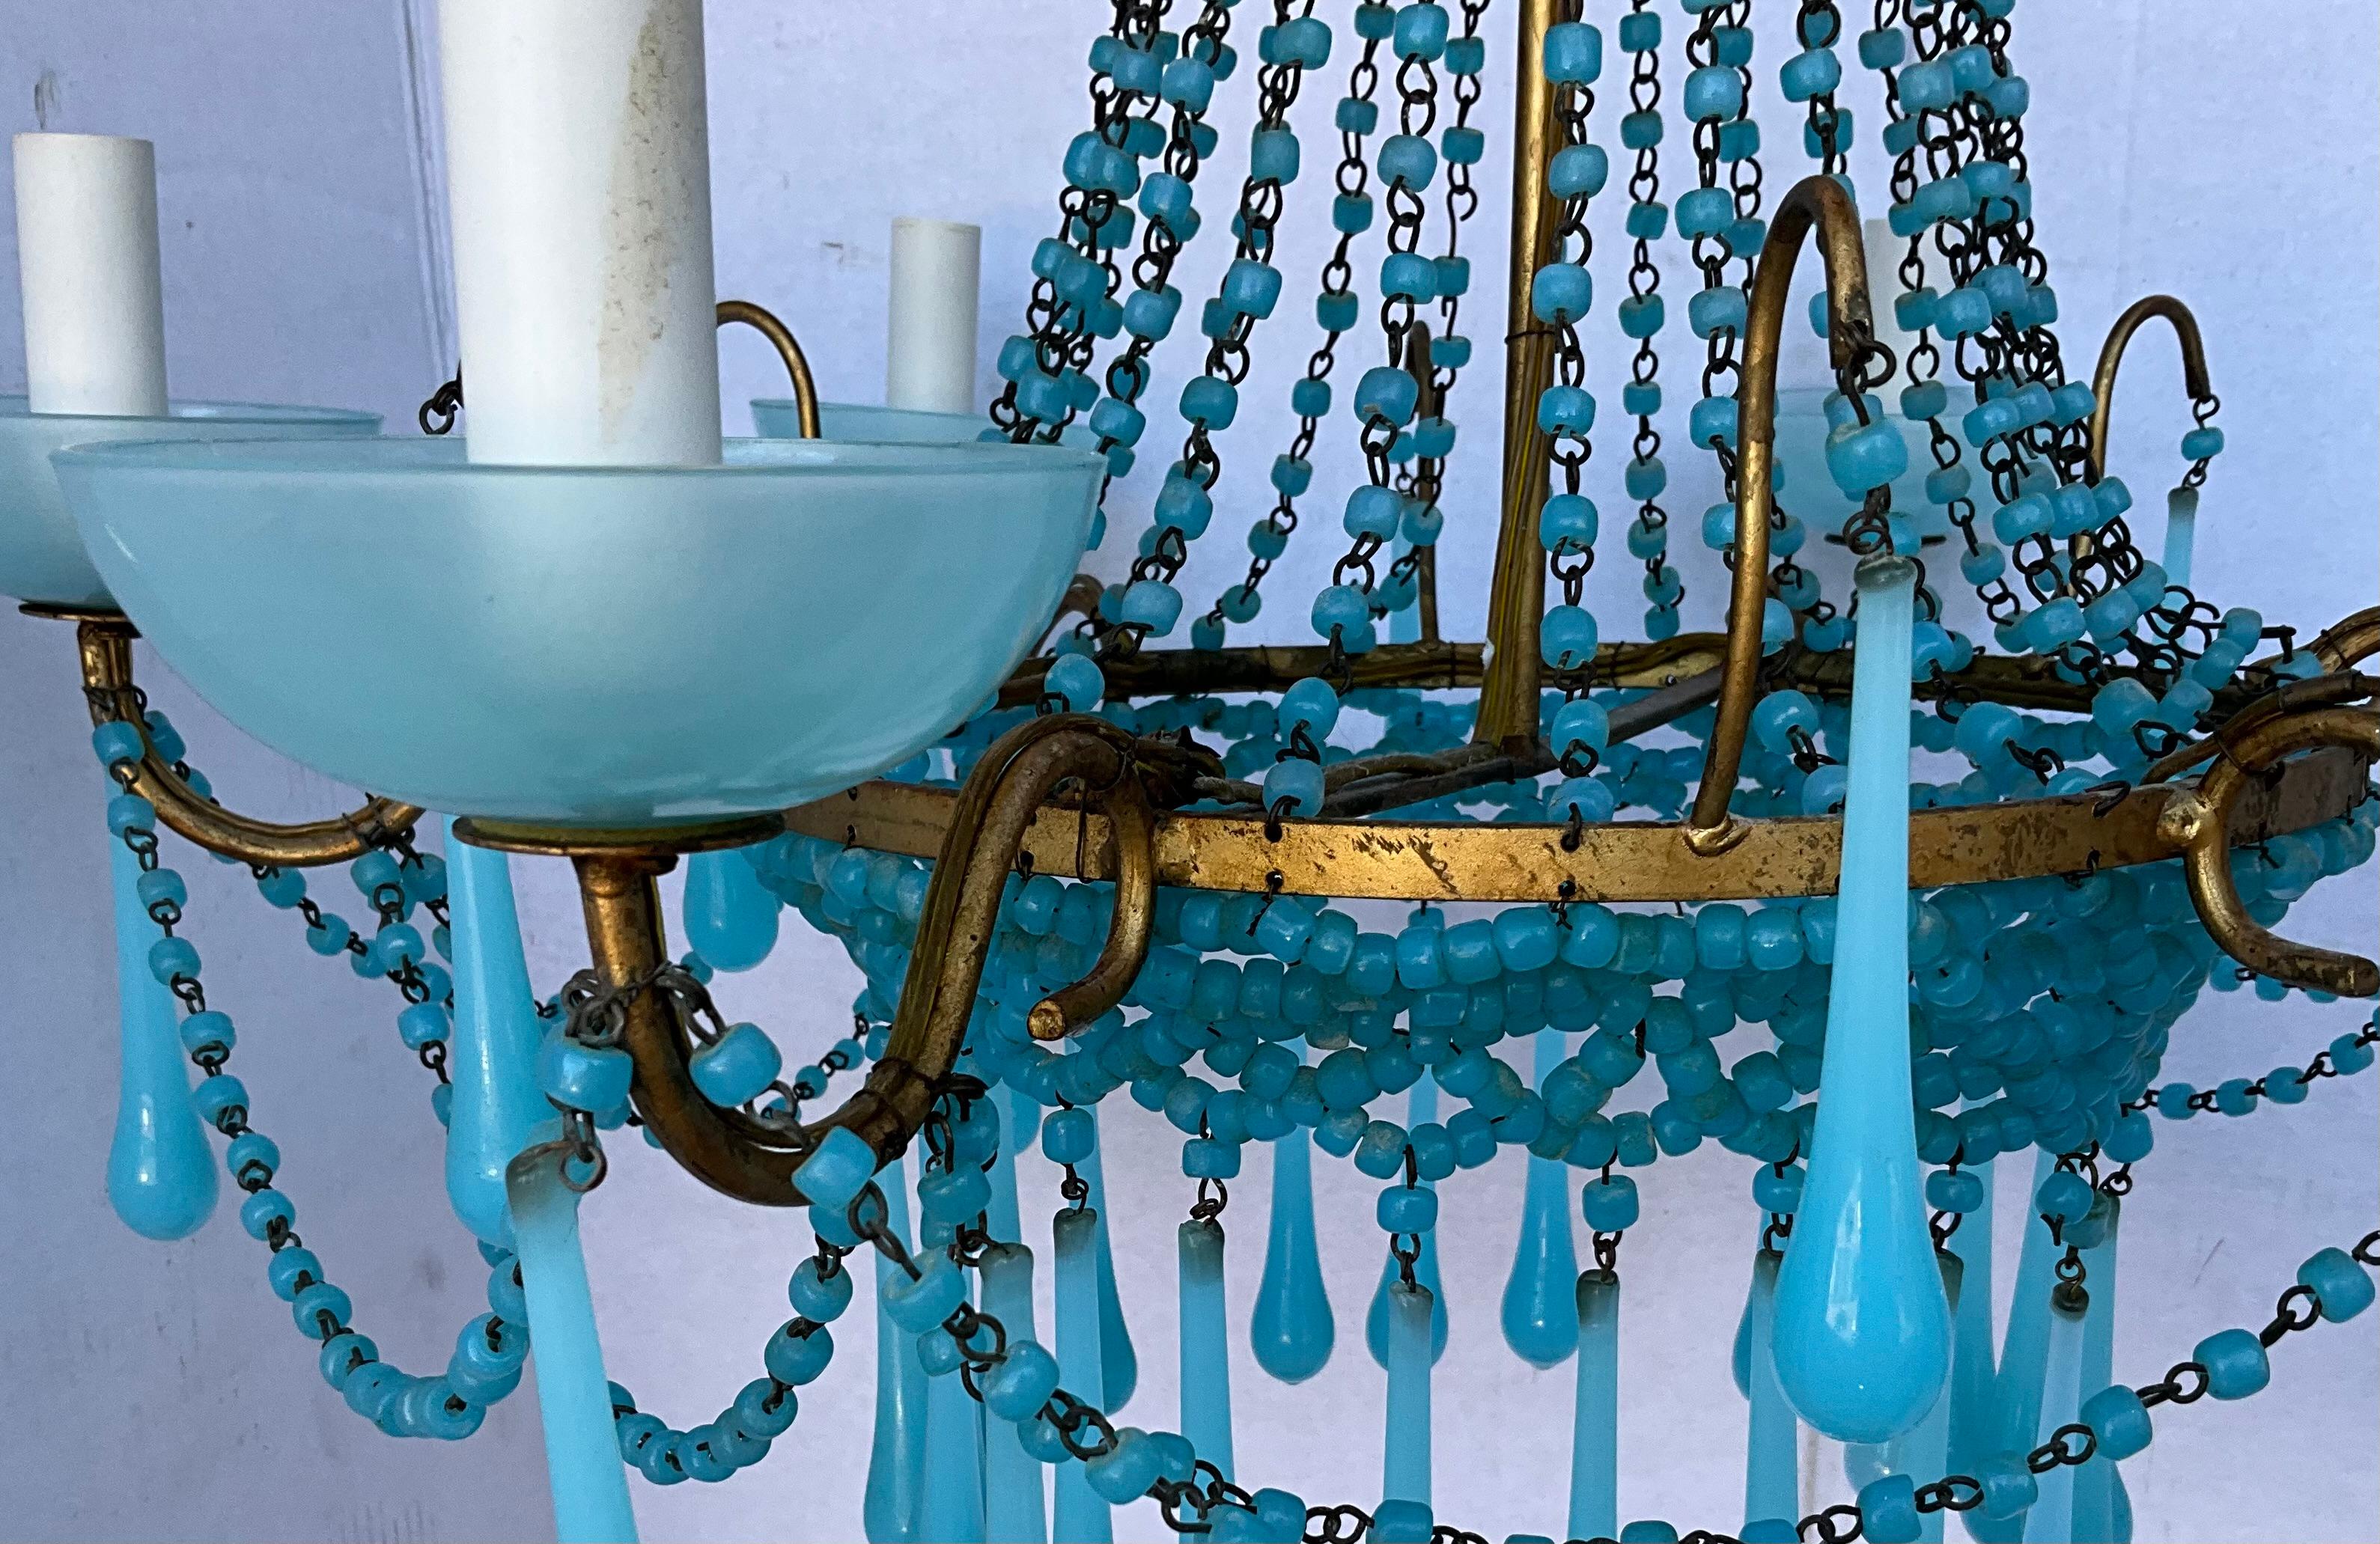 Late 20th Century Italian Turquoise Crystal & Gilt Metal Chandelier - 6 Arm  In Good Condition For Sale In Kennesaw, GA